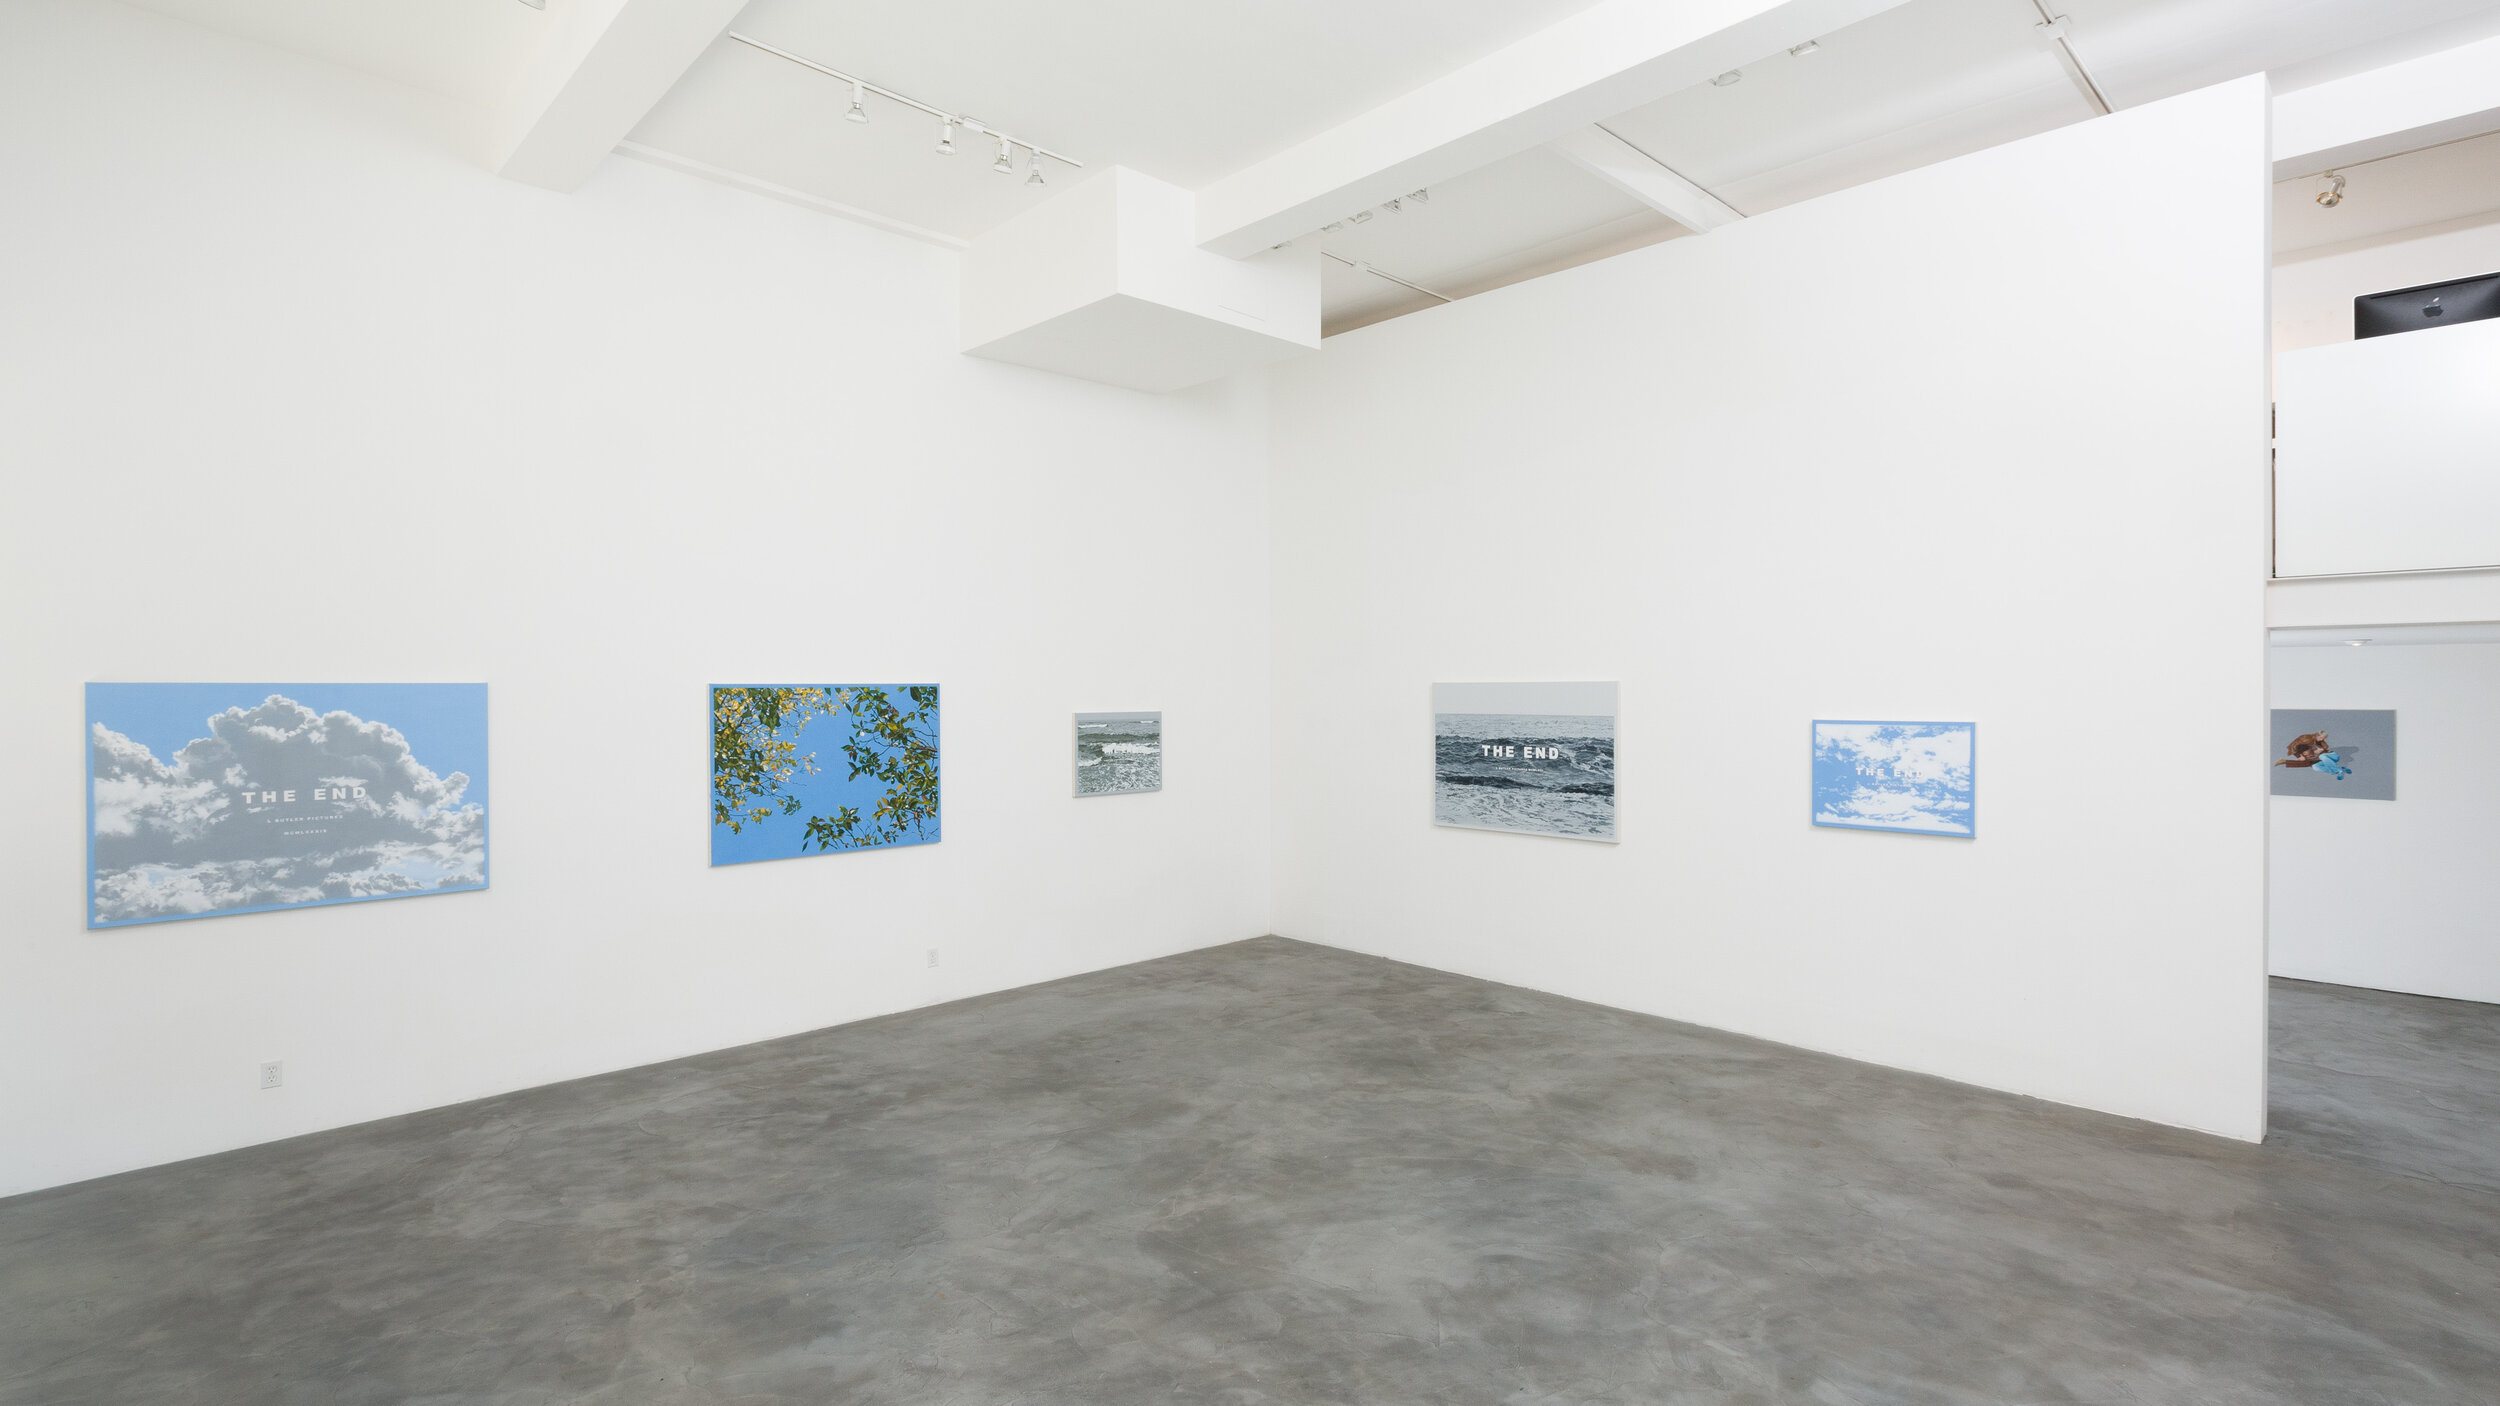  Luke Butler,  In Color and Black and White , In installation at CJG, May 2014 